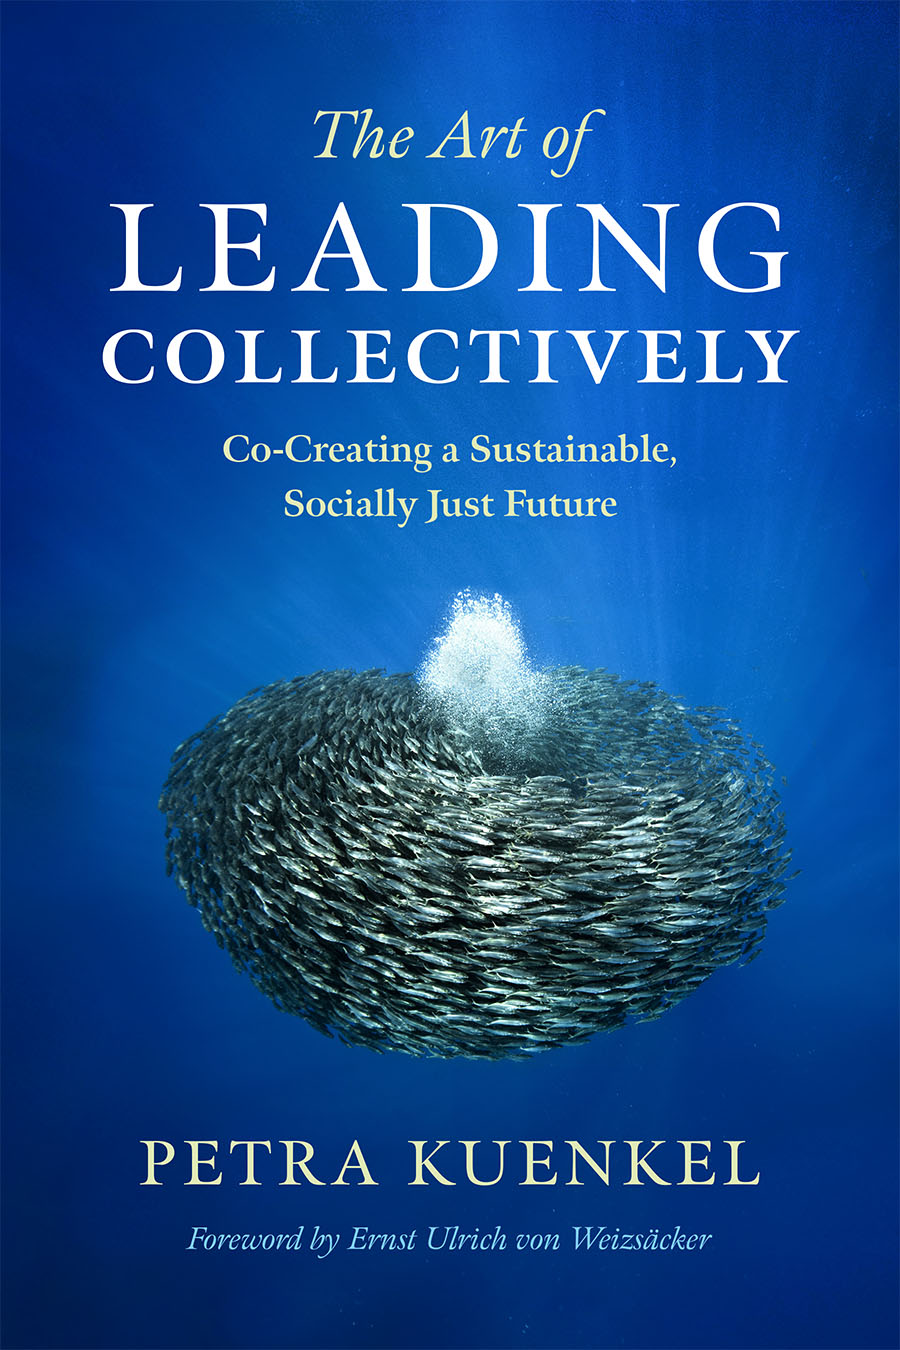 The Art of Leading Collectively: Co-Creating a Sustainable, Socially Just Future